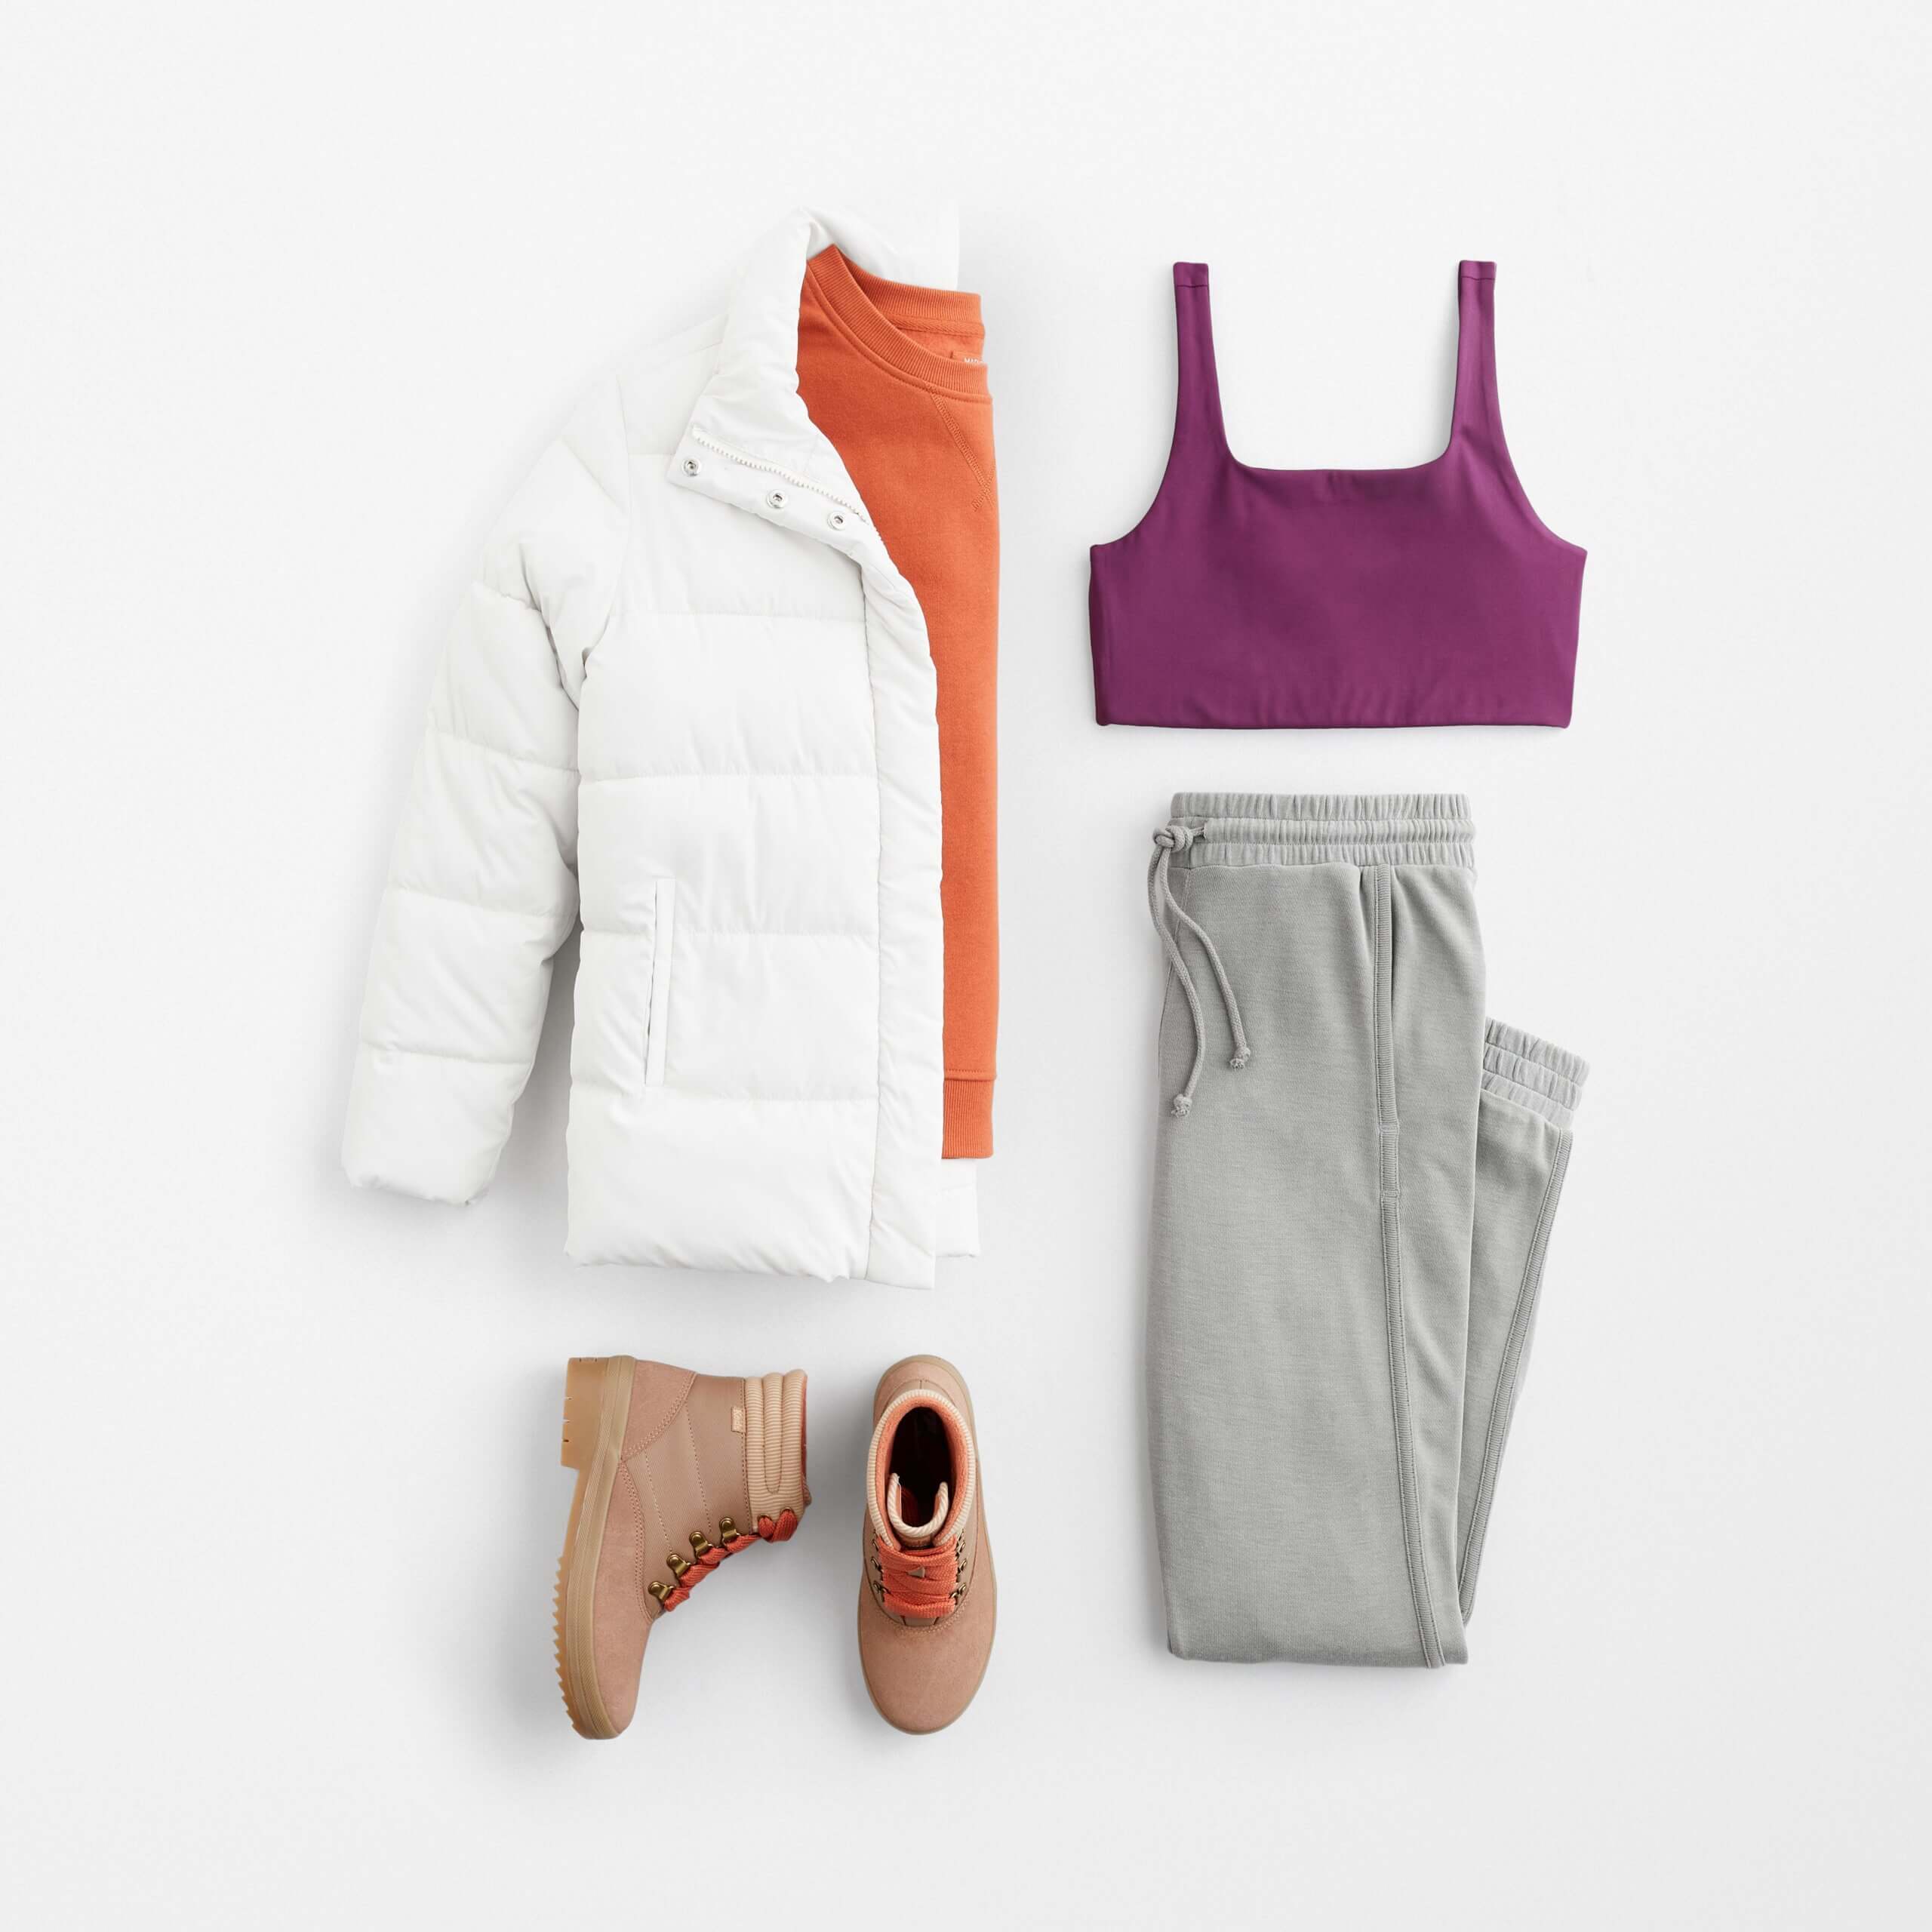 Stitch Fix women’s outfit for what to wear hiking with sports bra, orange top, white puffer jacket, joggers and hiking boots.